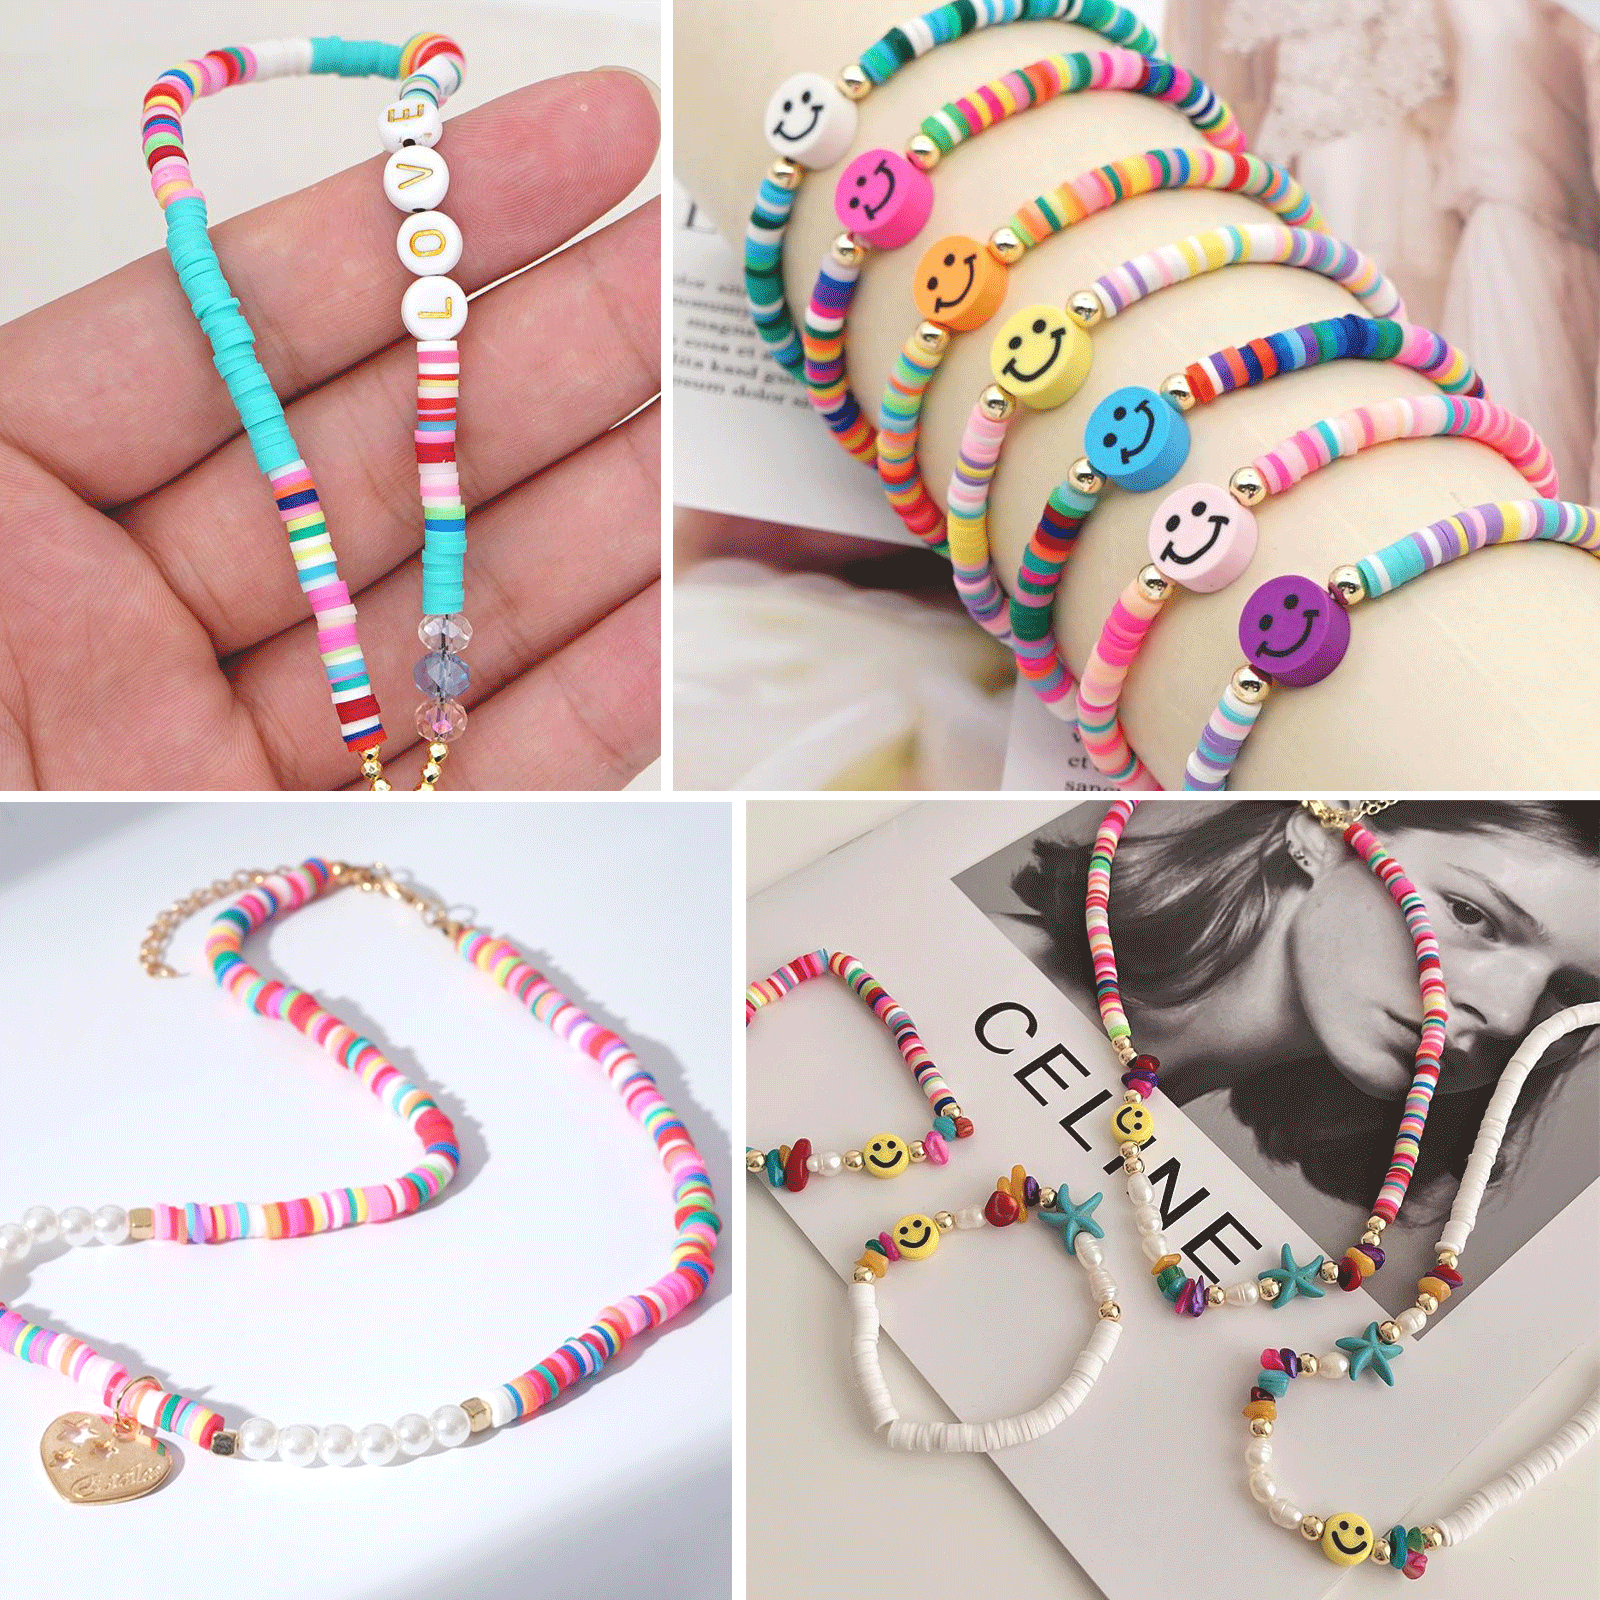 JEFFNIUB Clay Beads Bracelet Making Starter Kits for Girls, 12 Colors Flat  Round Polymer Clay Beads 6 CUTE DESIGNS Letter Smiley Fruit Flower Shape